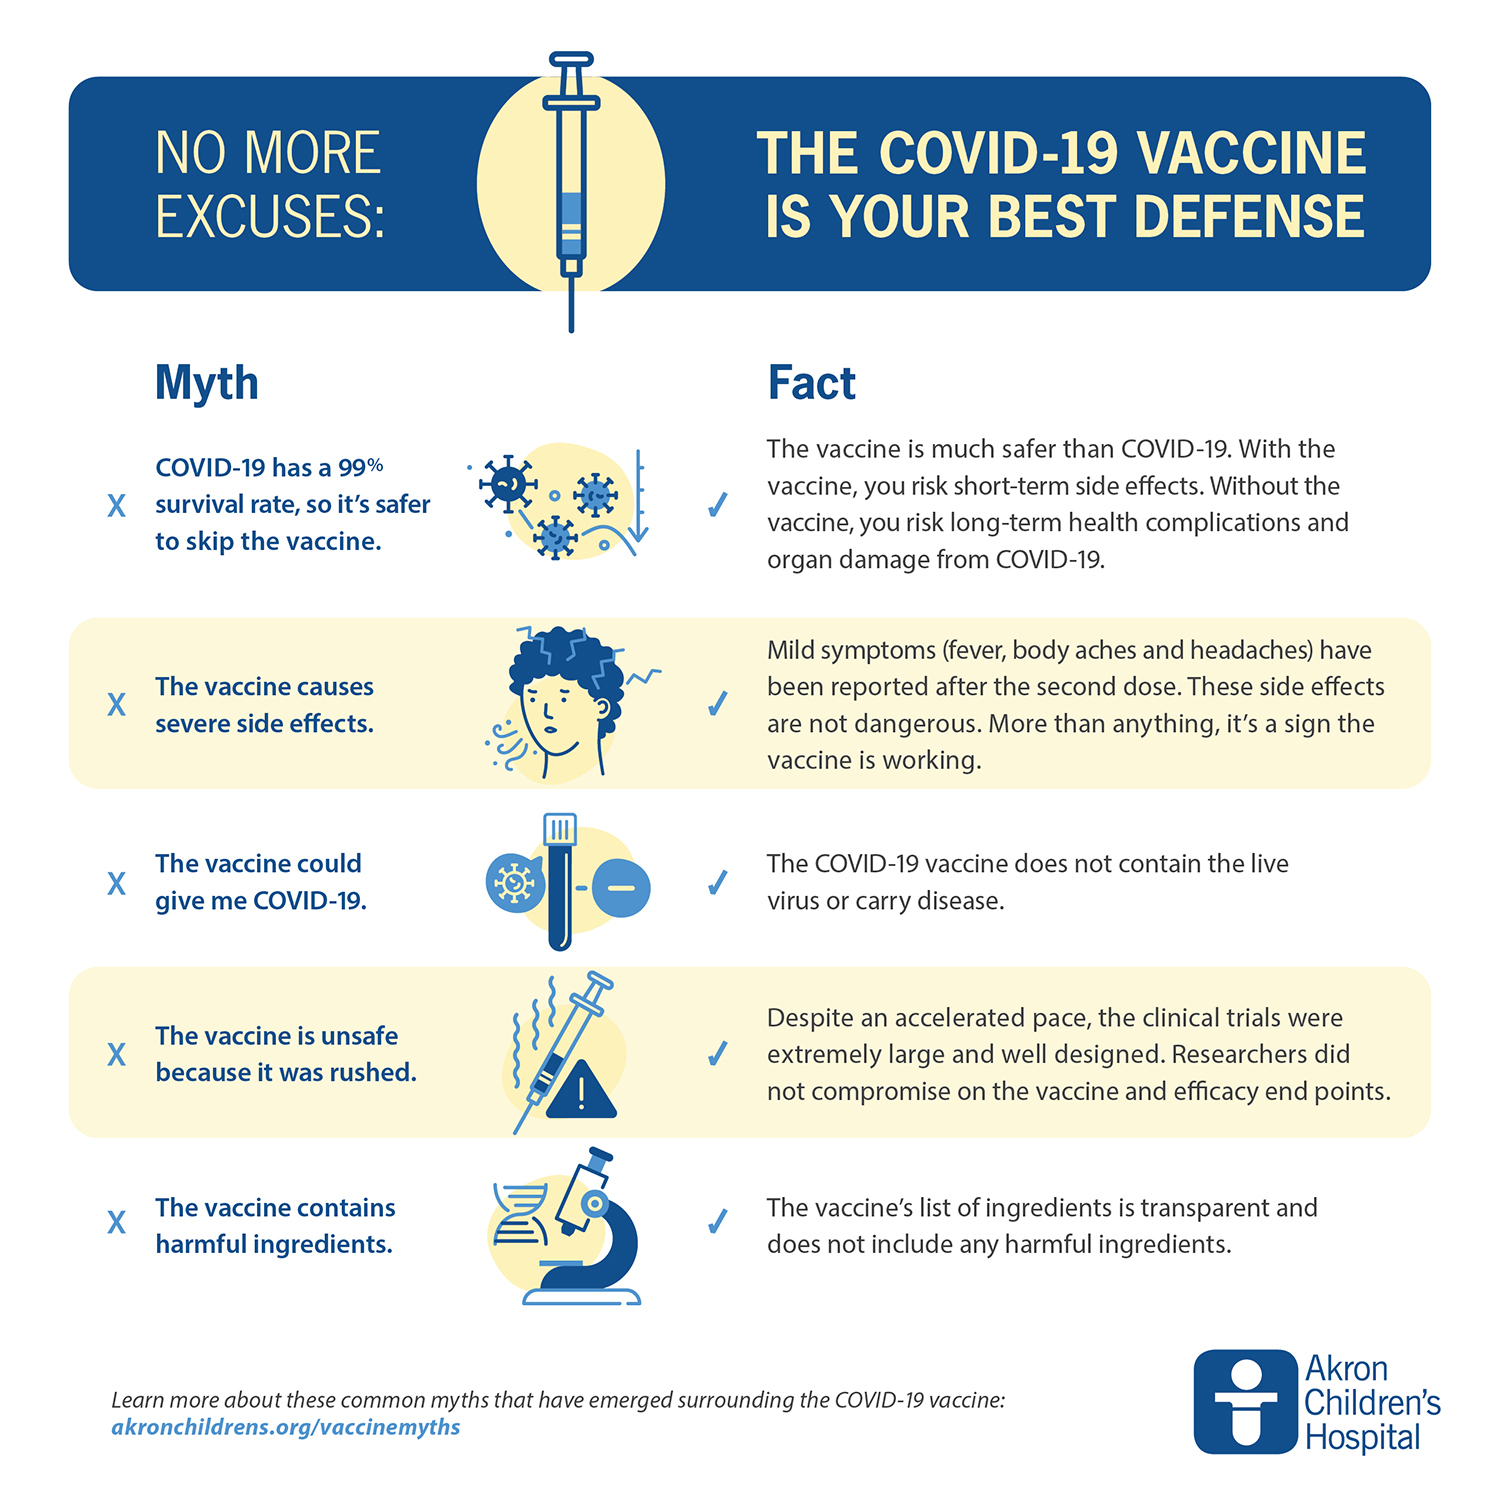 Covid is best 19 for the vaccine which Top 8